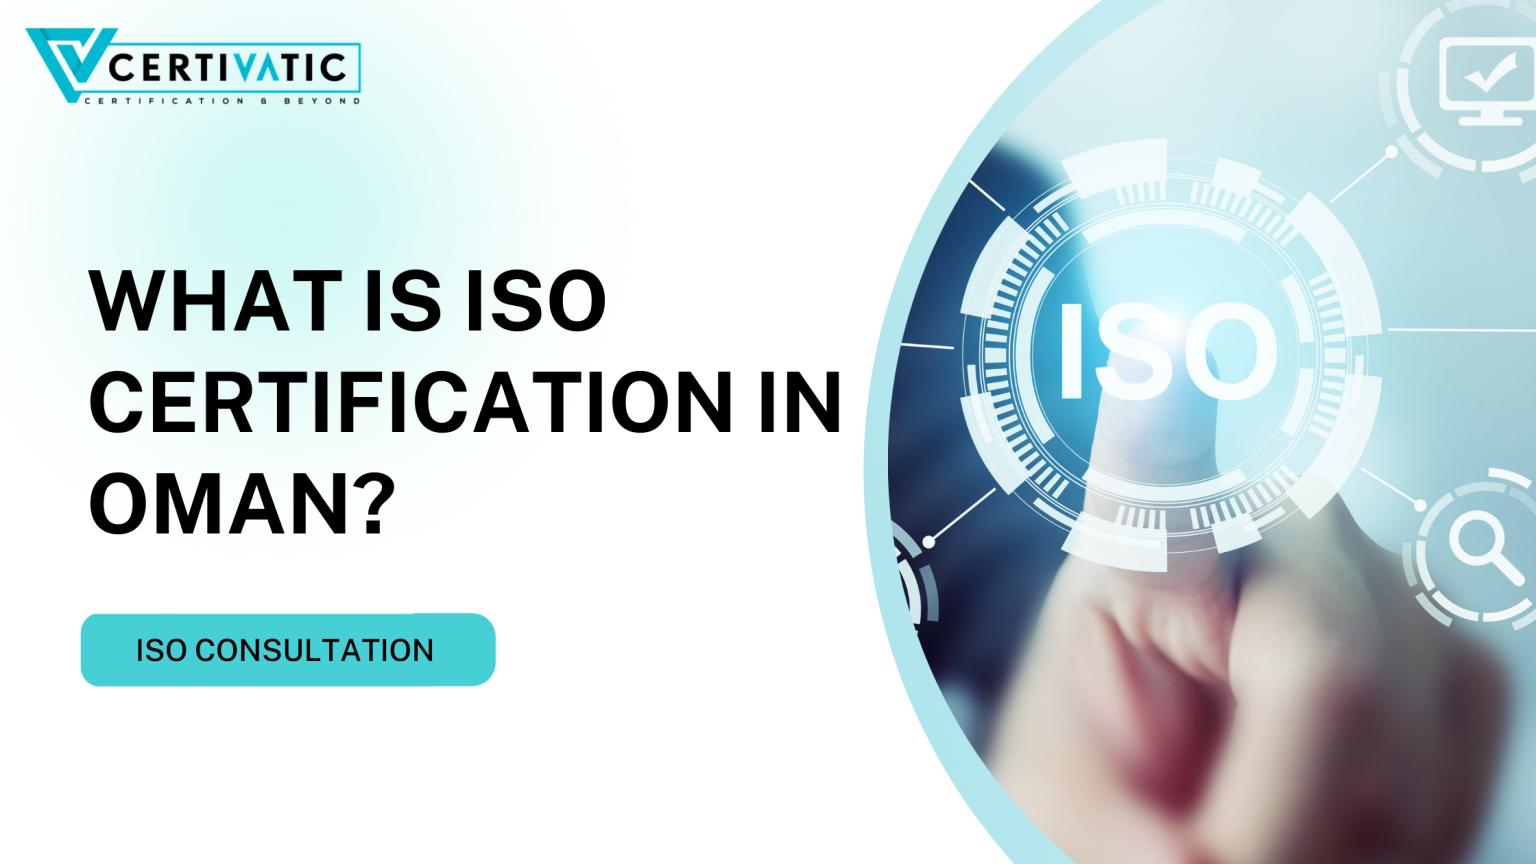 What is ISO Certification in Oman?